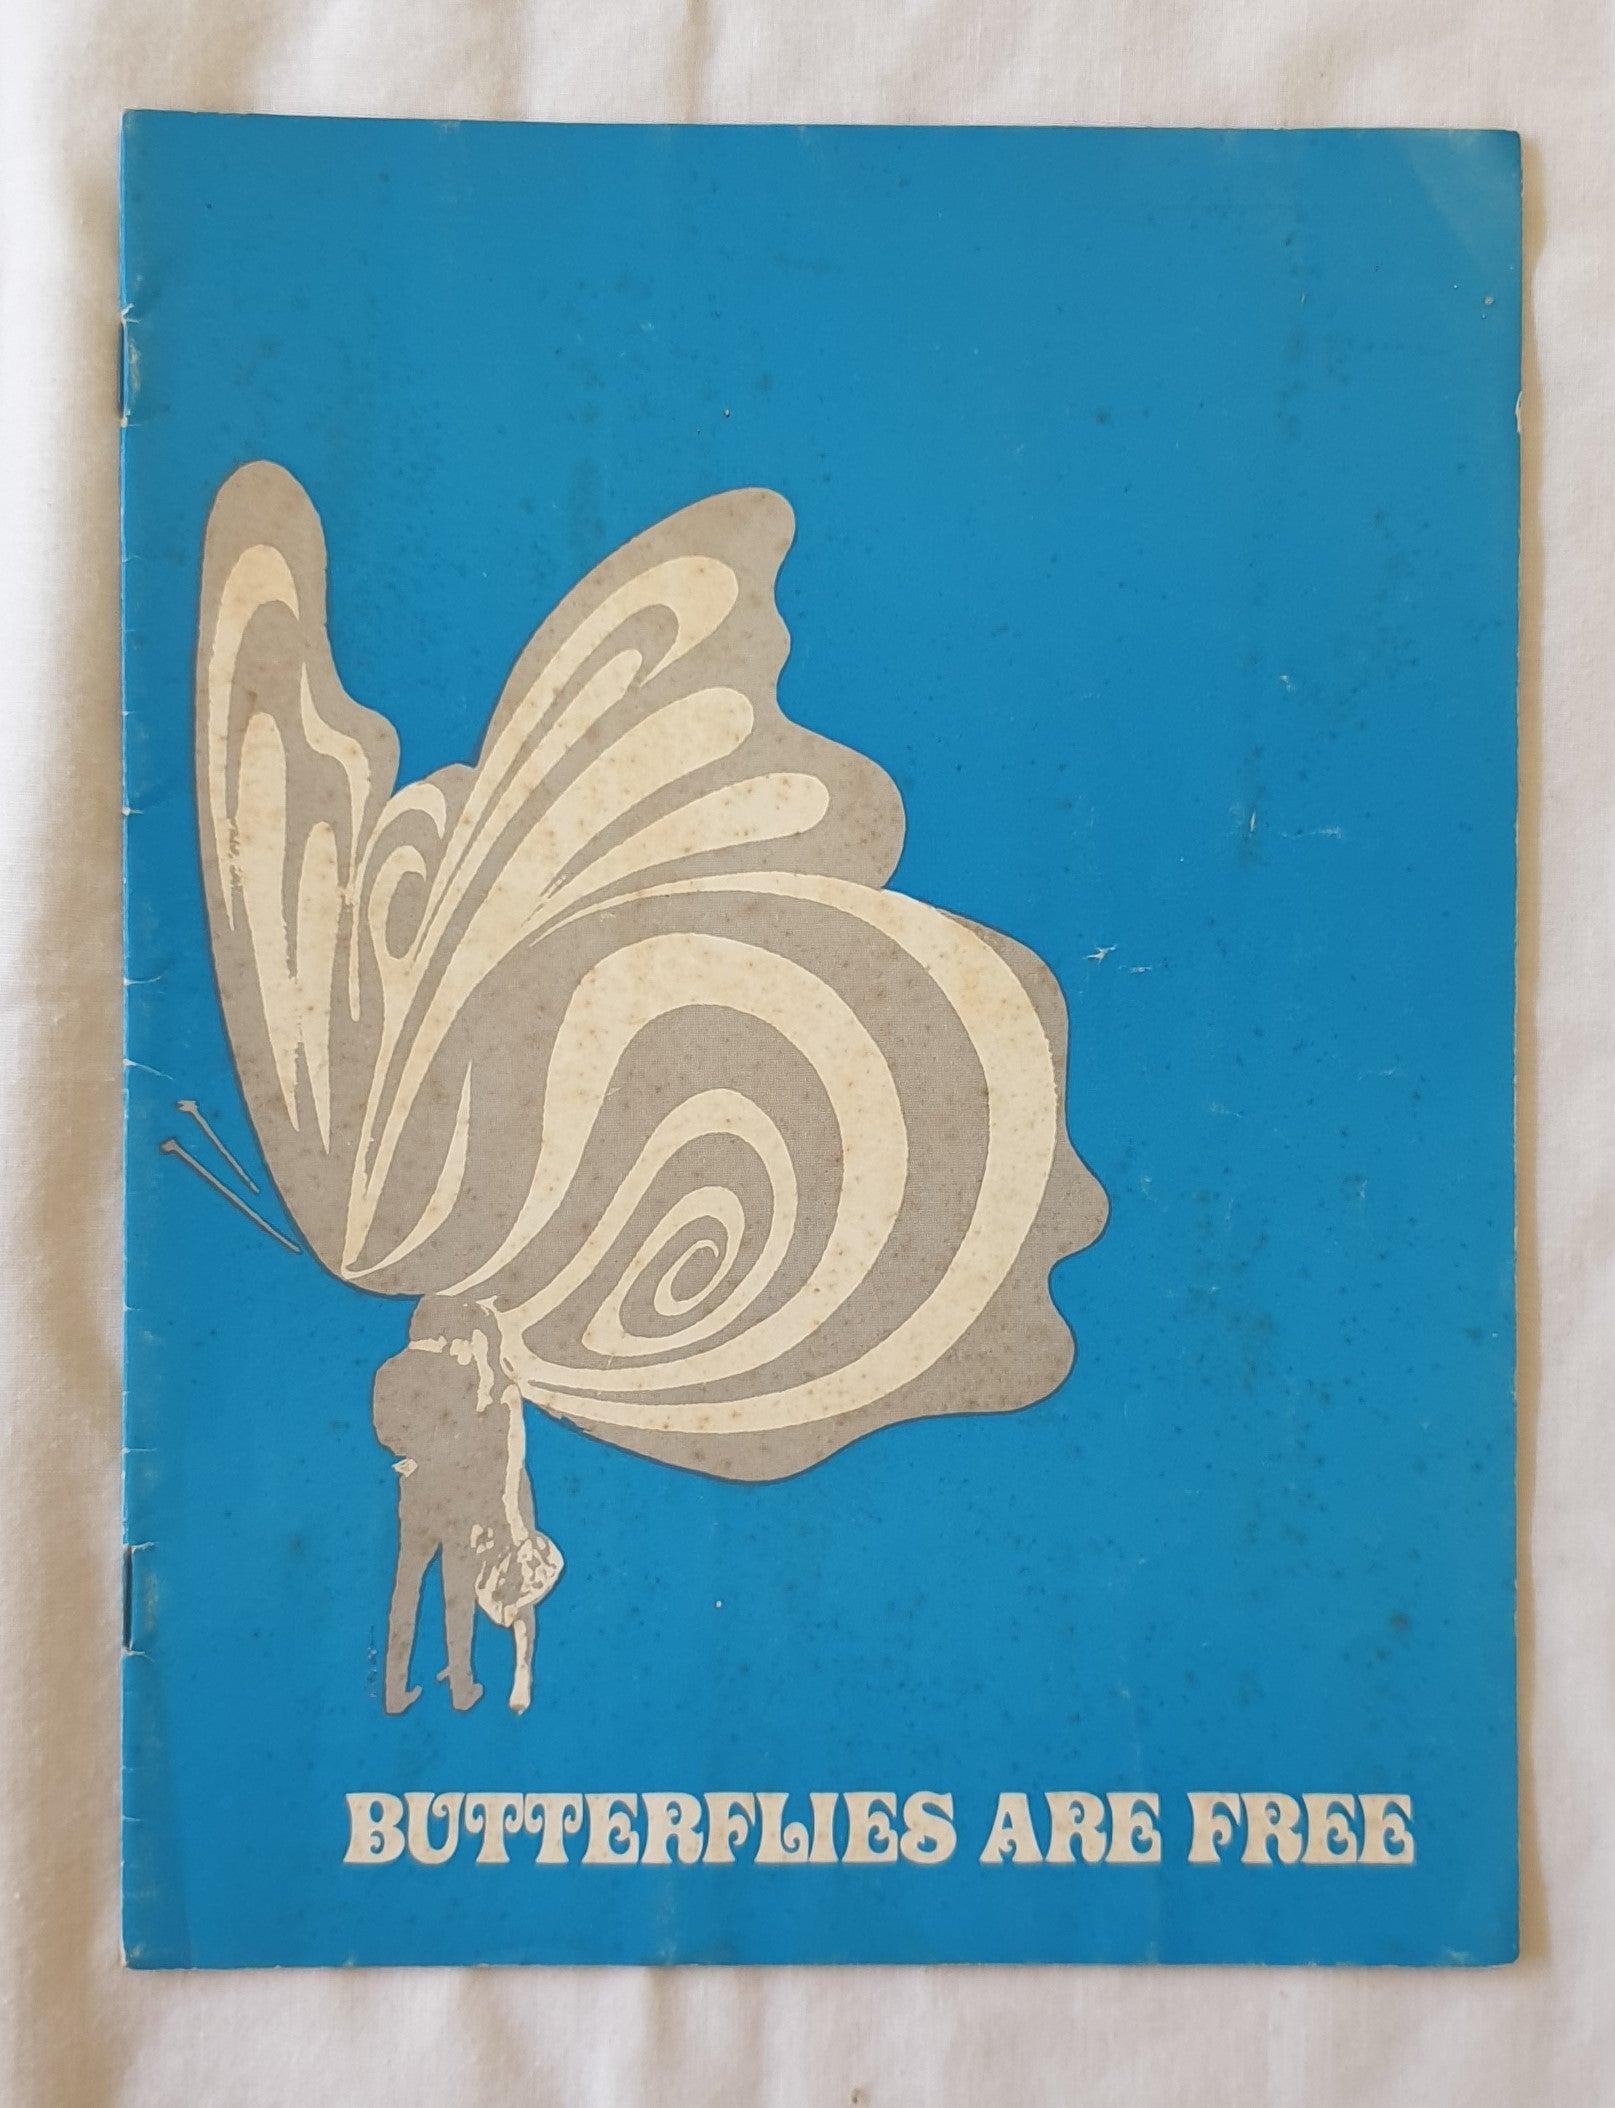 Butterflies Are Free  by Leonard Gershe  Presented by Harry M. Miller